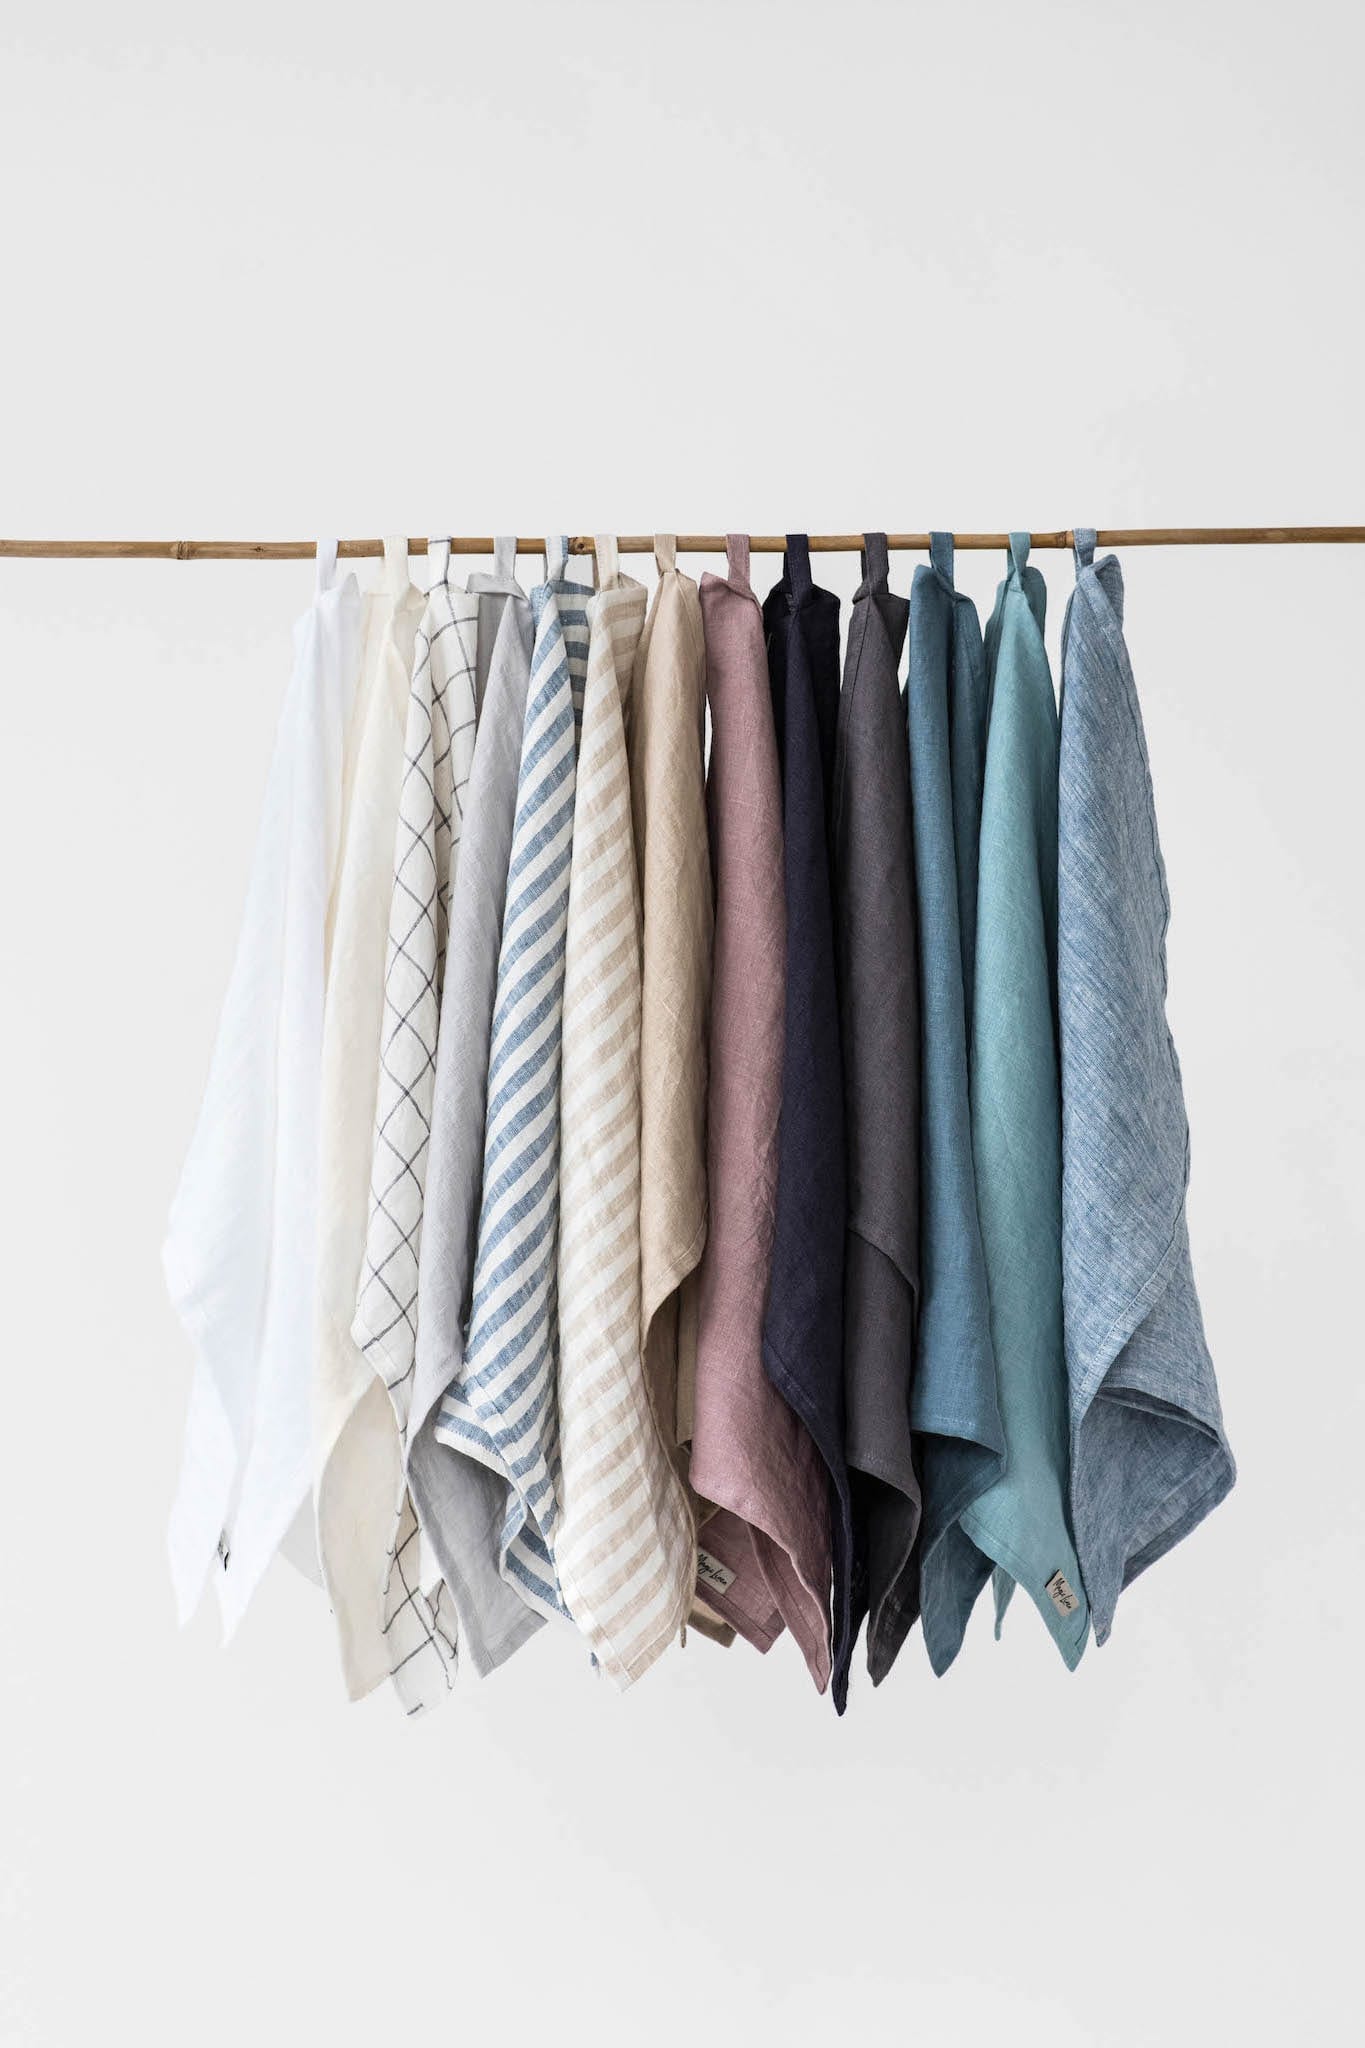 Did you know how linen fabric is made, what are the benefits, or what to look for when choosing good quality linen products? Are you caring for your linen items correctly? Find out!